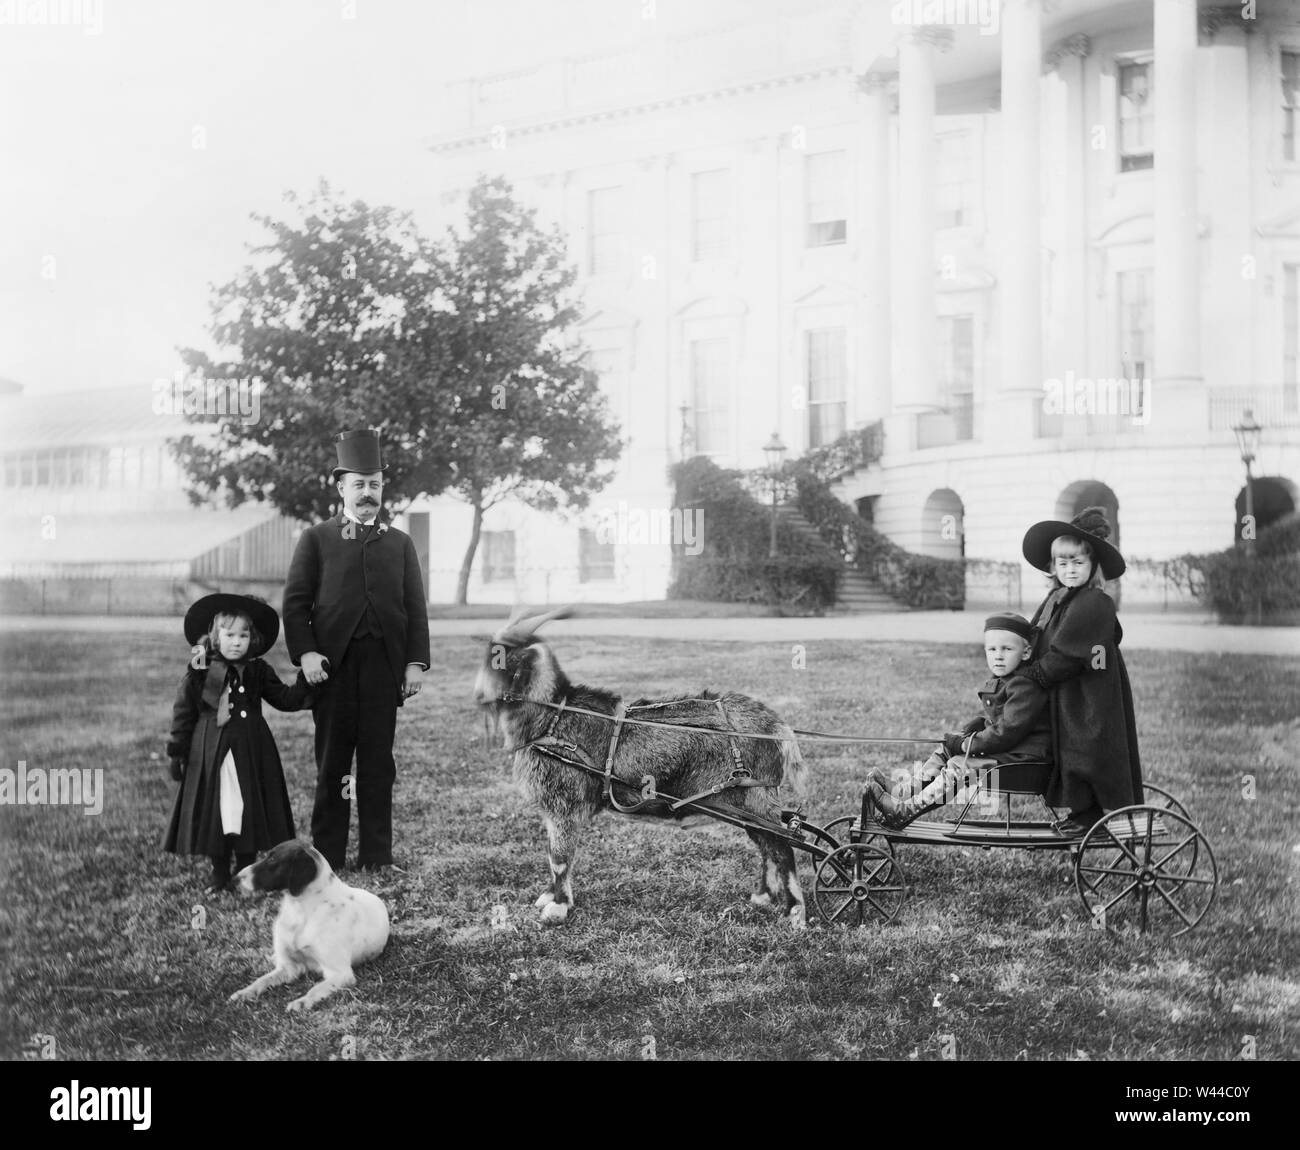 Major Russell Harrison, son of U.S. President Benjamin Harrison, with his daughter Marthena and nephew and niece (Benjamin 'Baby' and Mary McKee) on a cart pulled by the presidential pet goat 'Whiskers' at the White House, Washington DC, USA, Photograph by Francis Benjamin Johnston between 1889 and 1893 Stock Photo